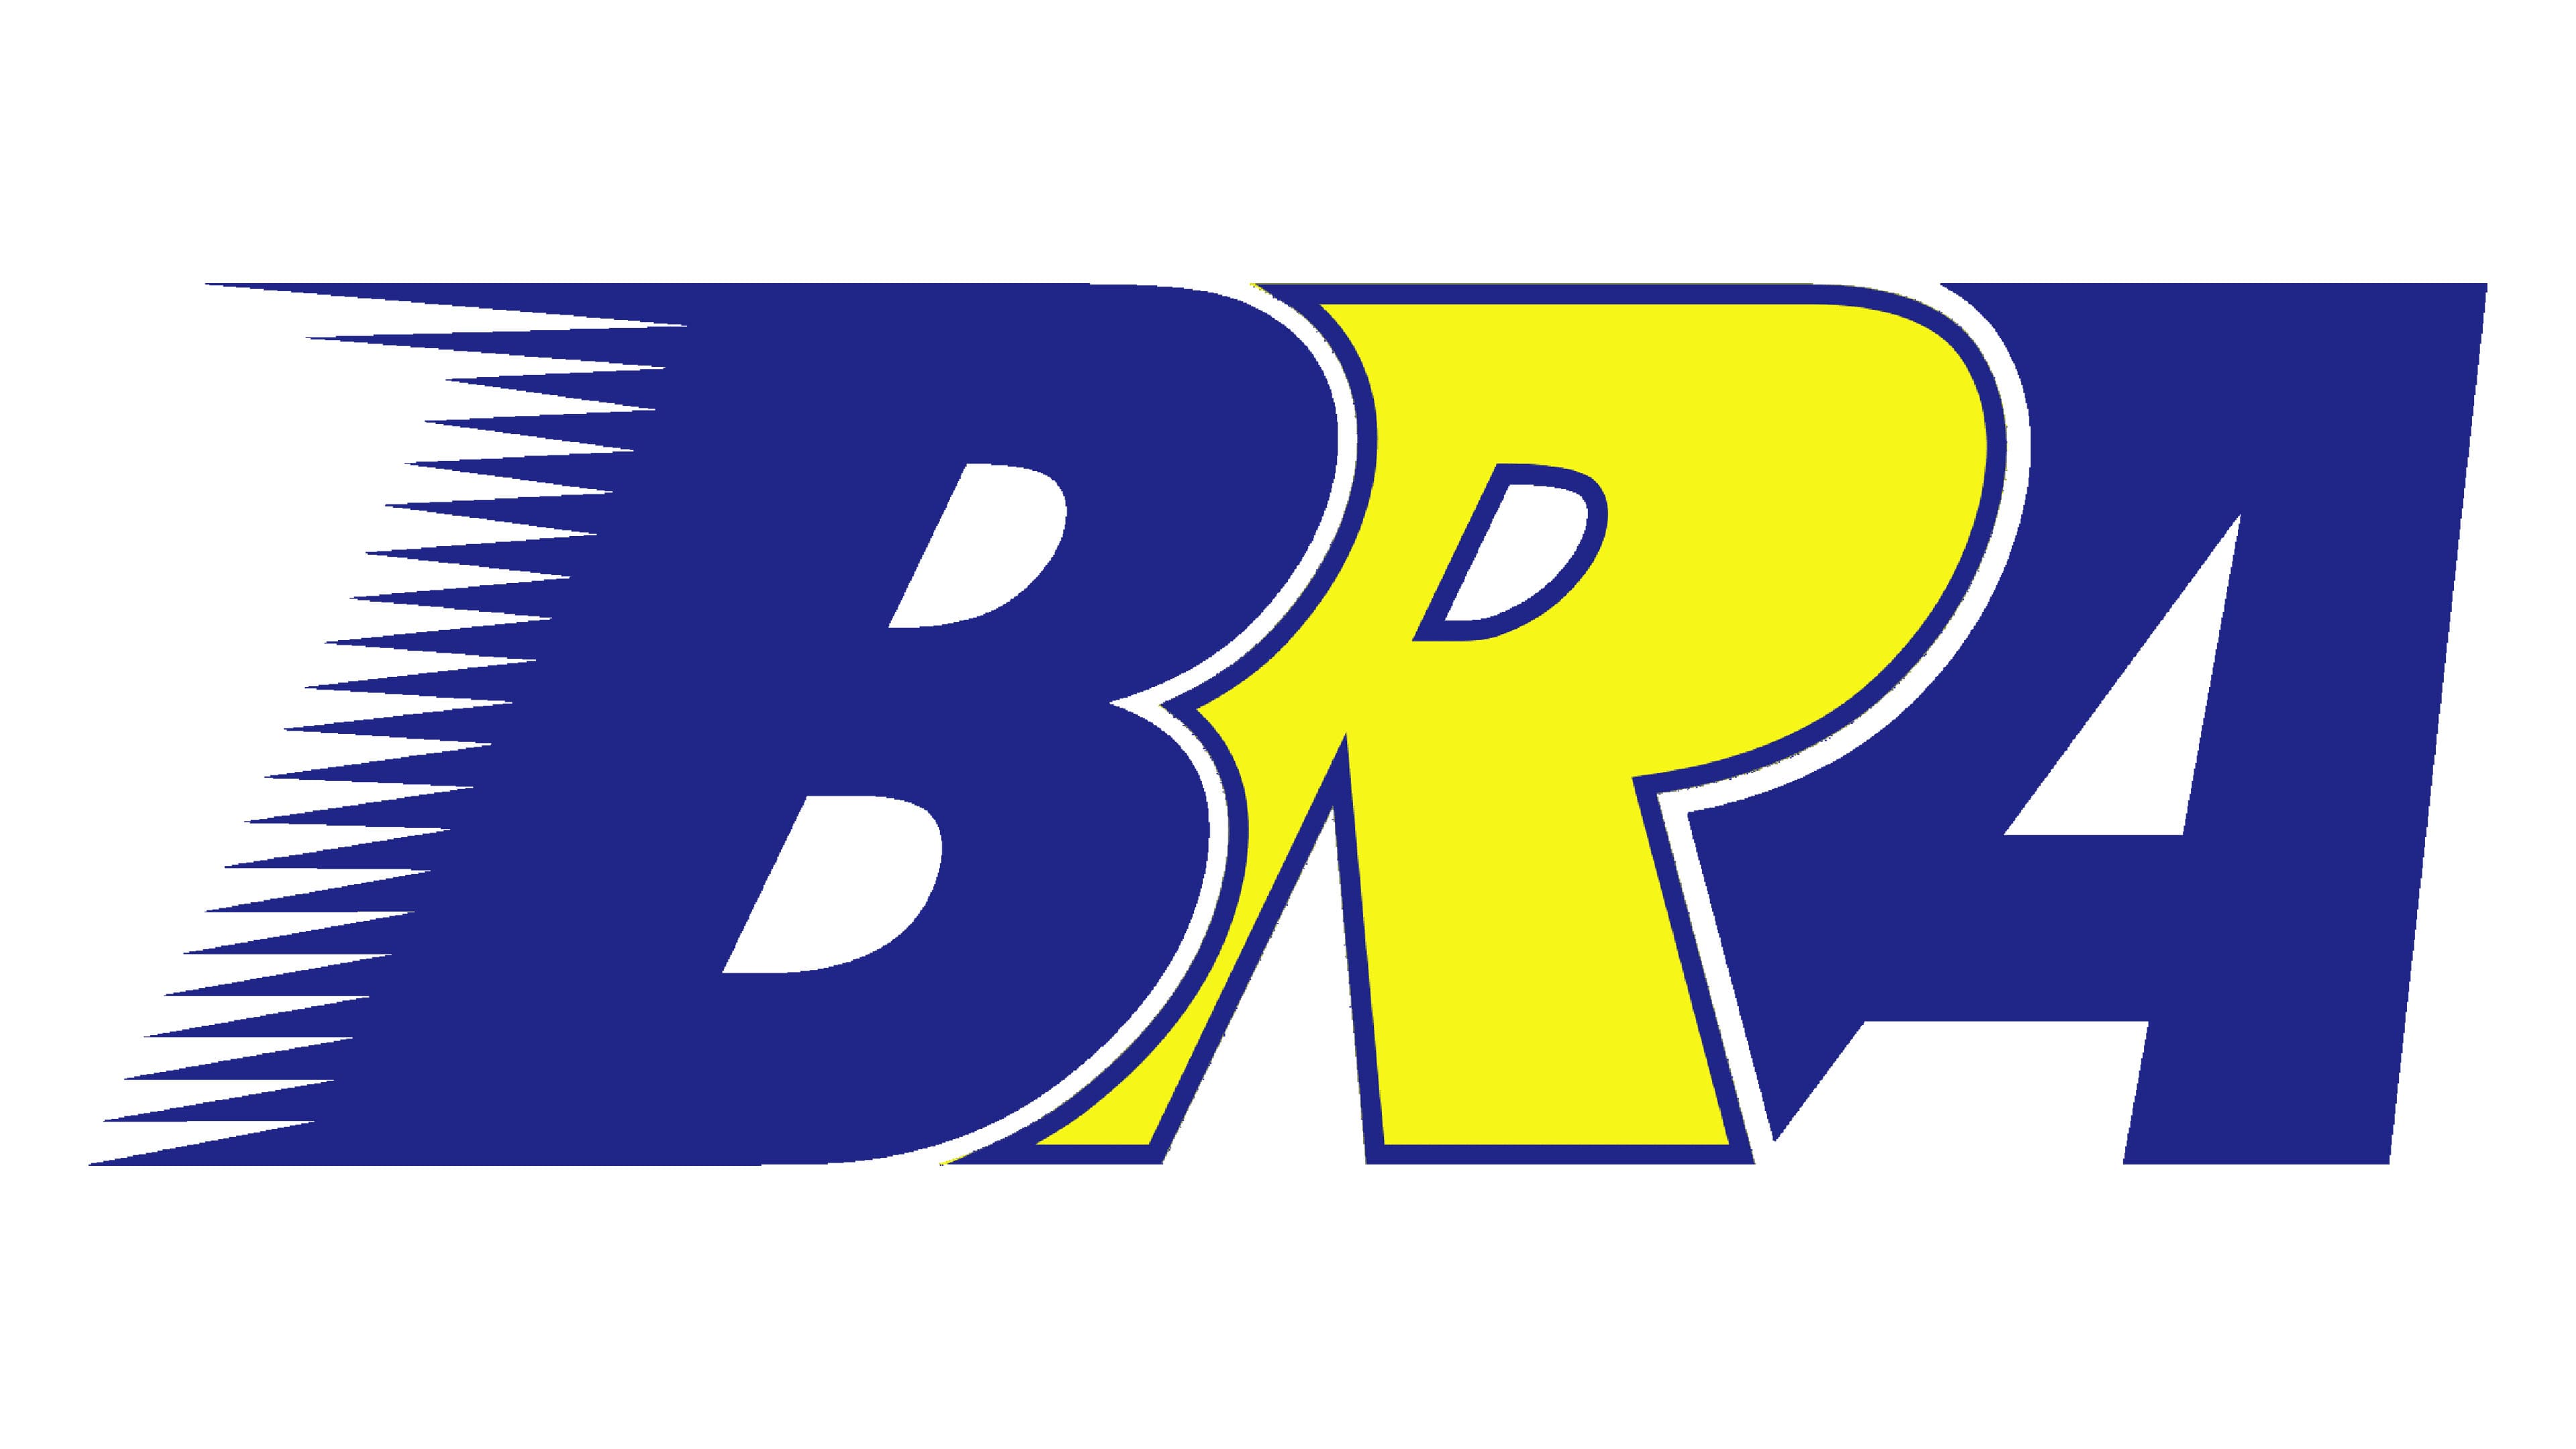 BRA Transportes Aéreos Logo and symbol, meaning, history, PNG, brand